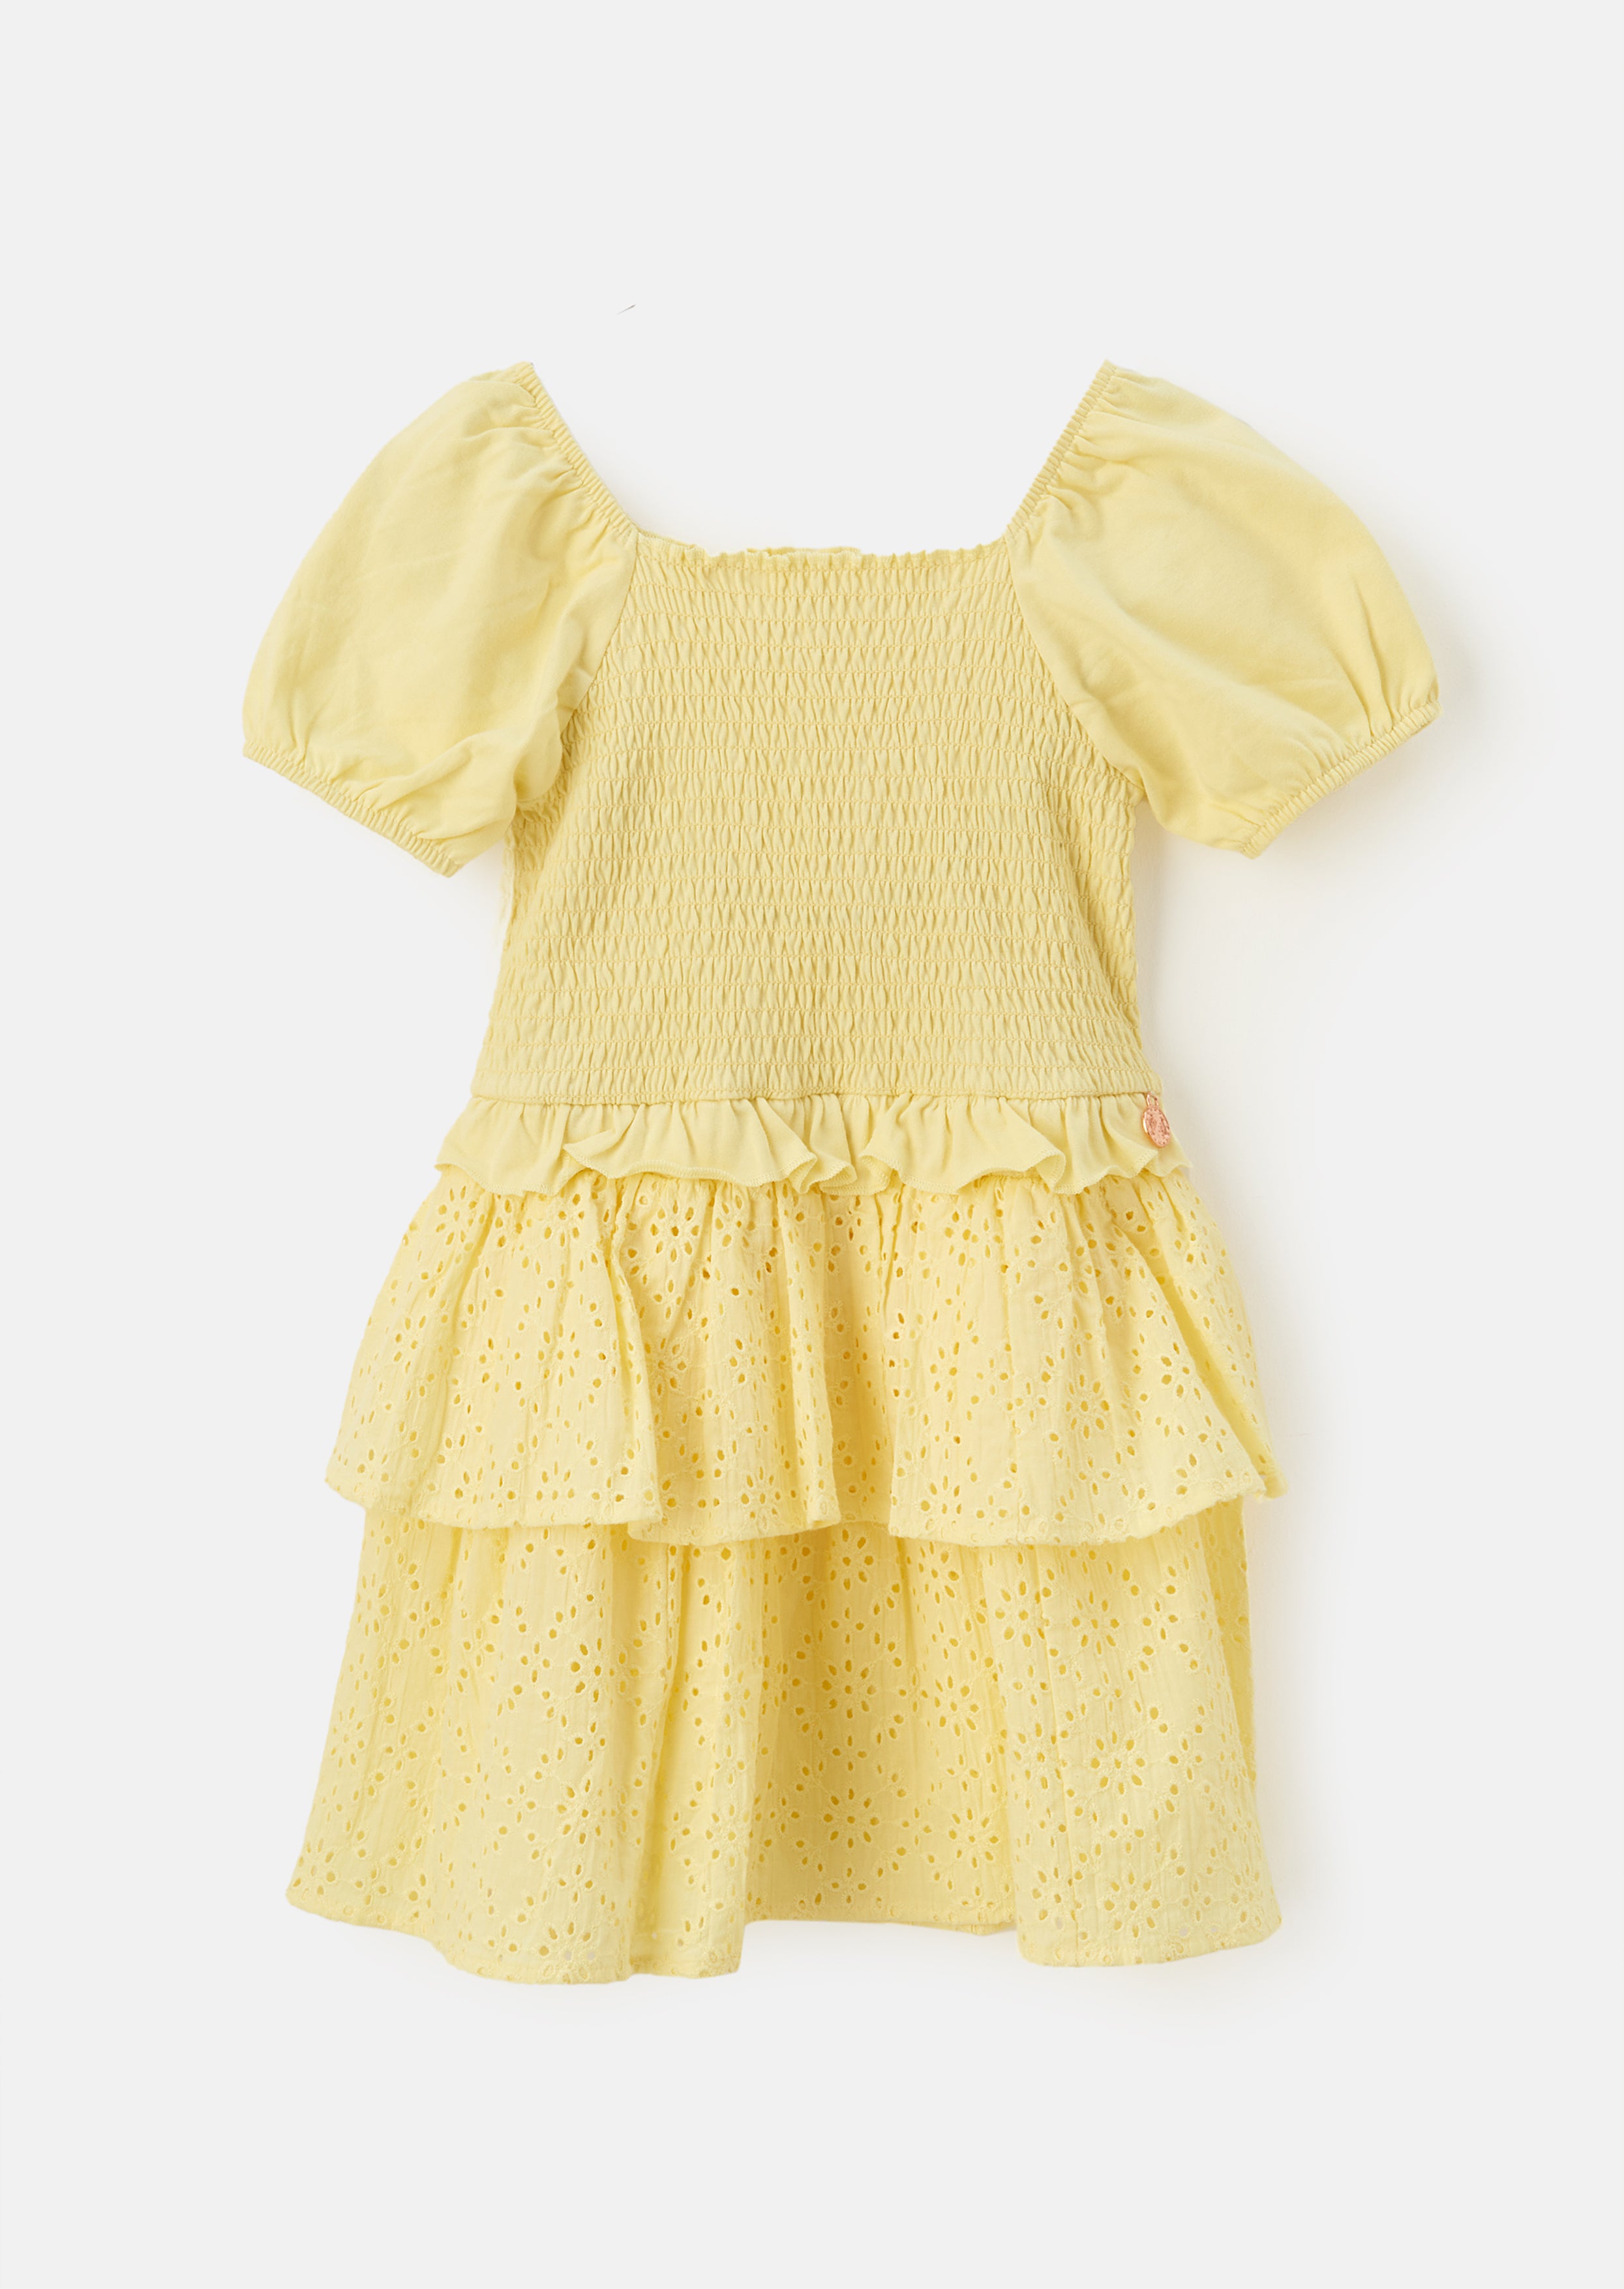 Girls Floral Embroidered Yellow Dress with Puff Sleeves